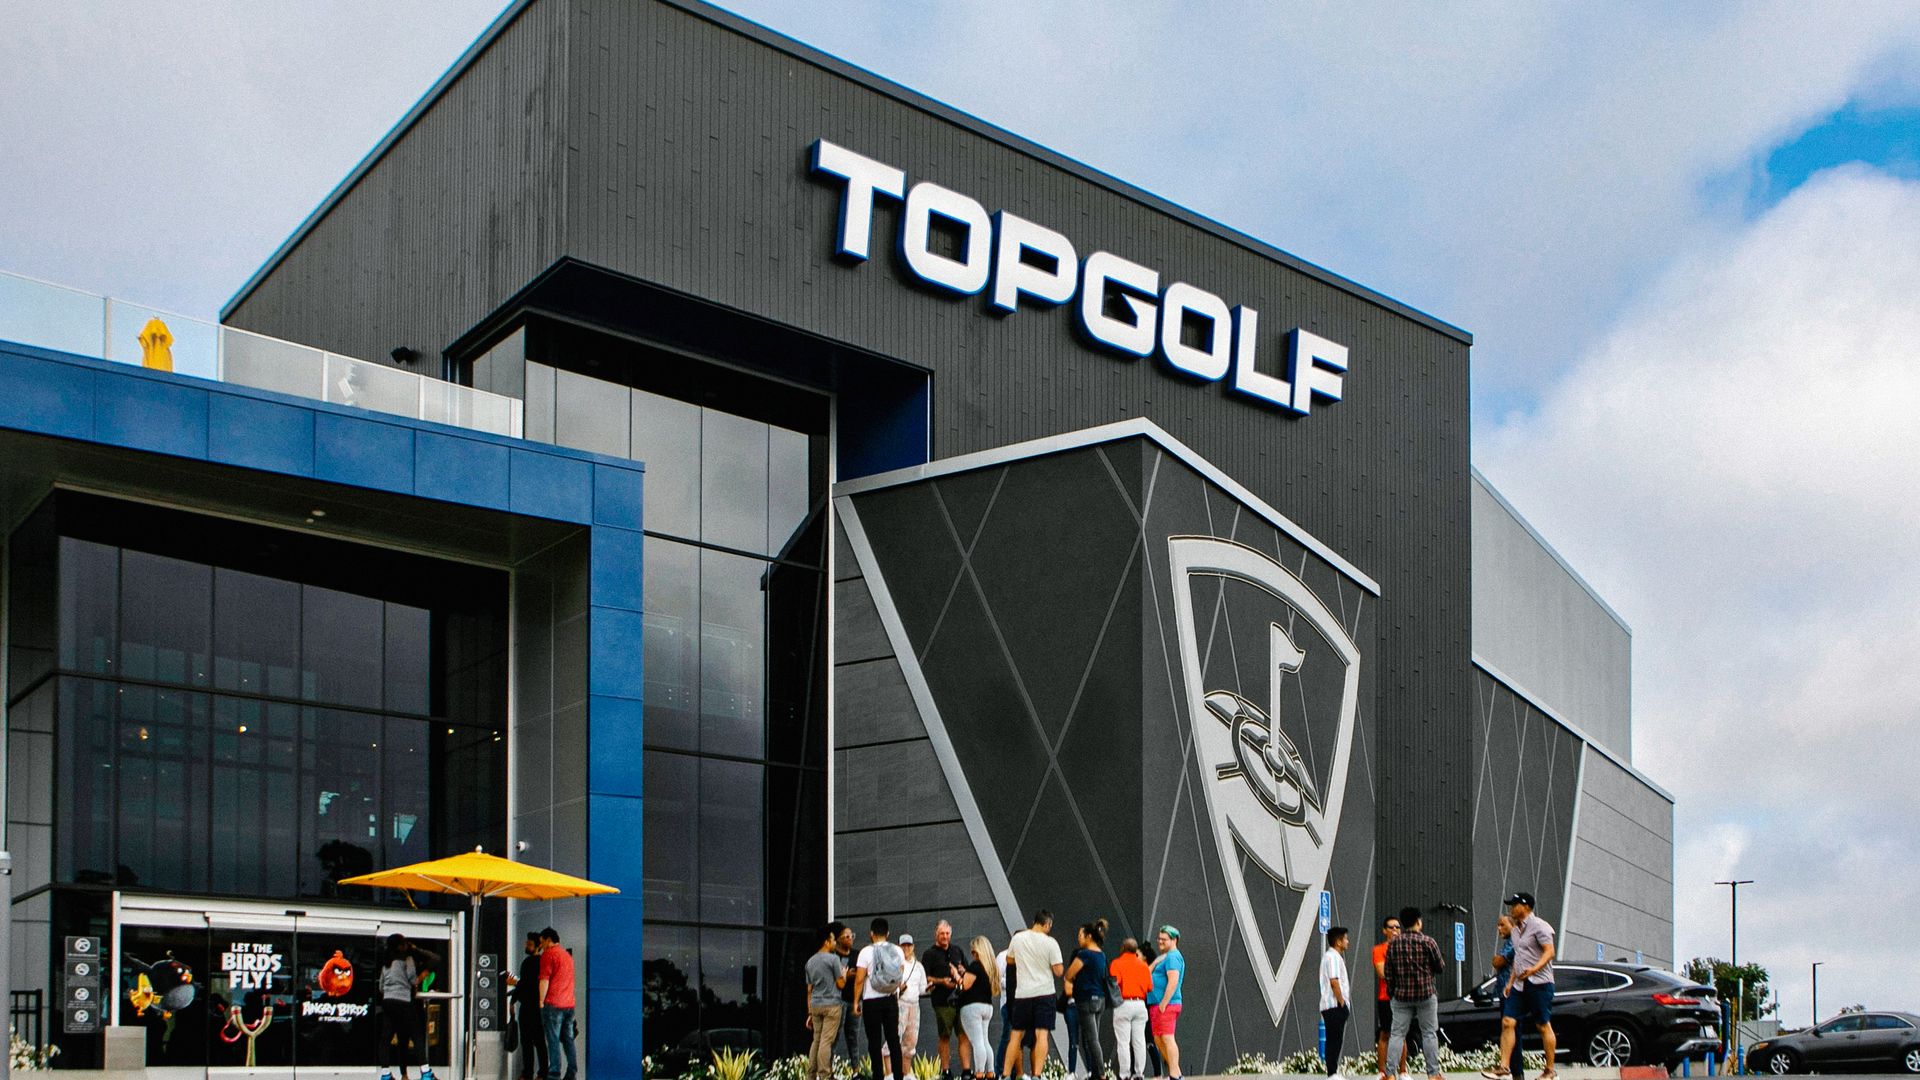 Topgolf expected to open in Durham on April 12, create 500 jobs Axios